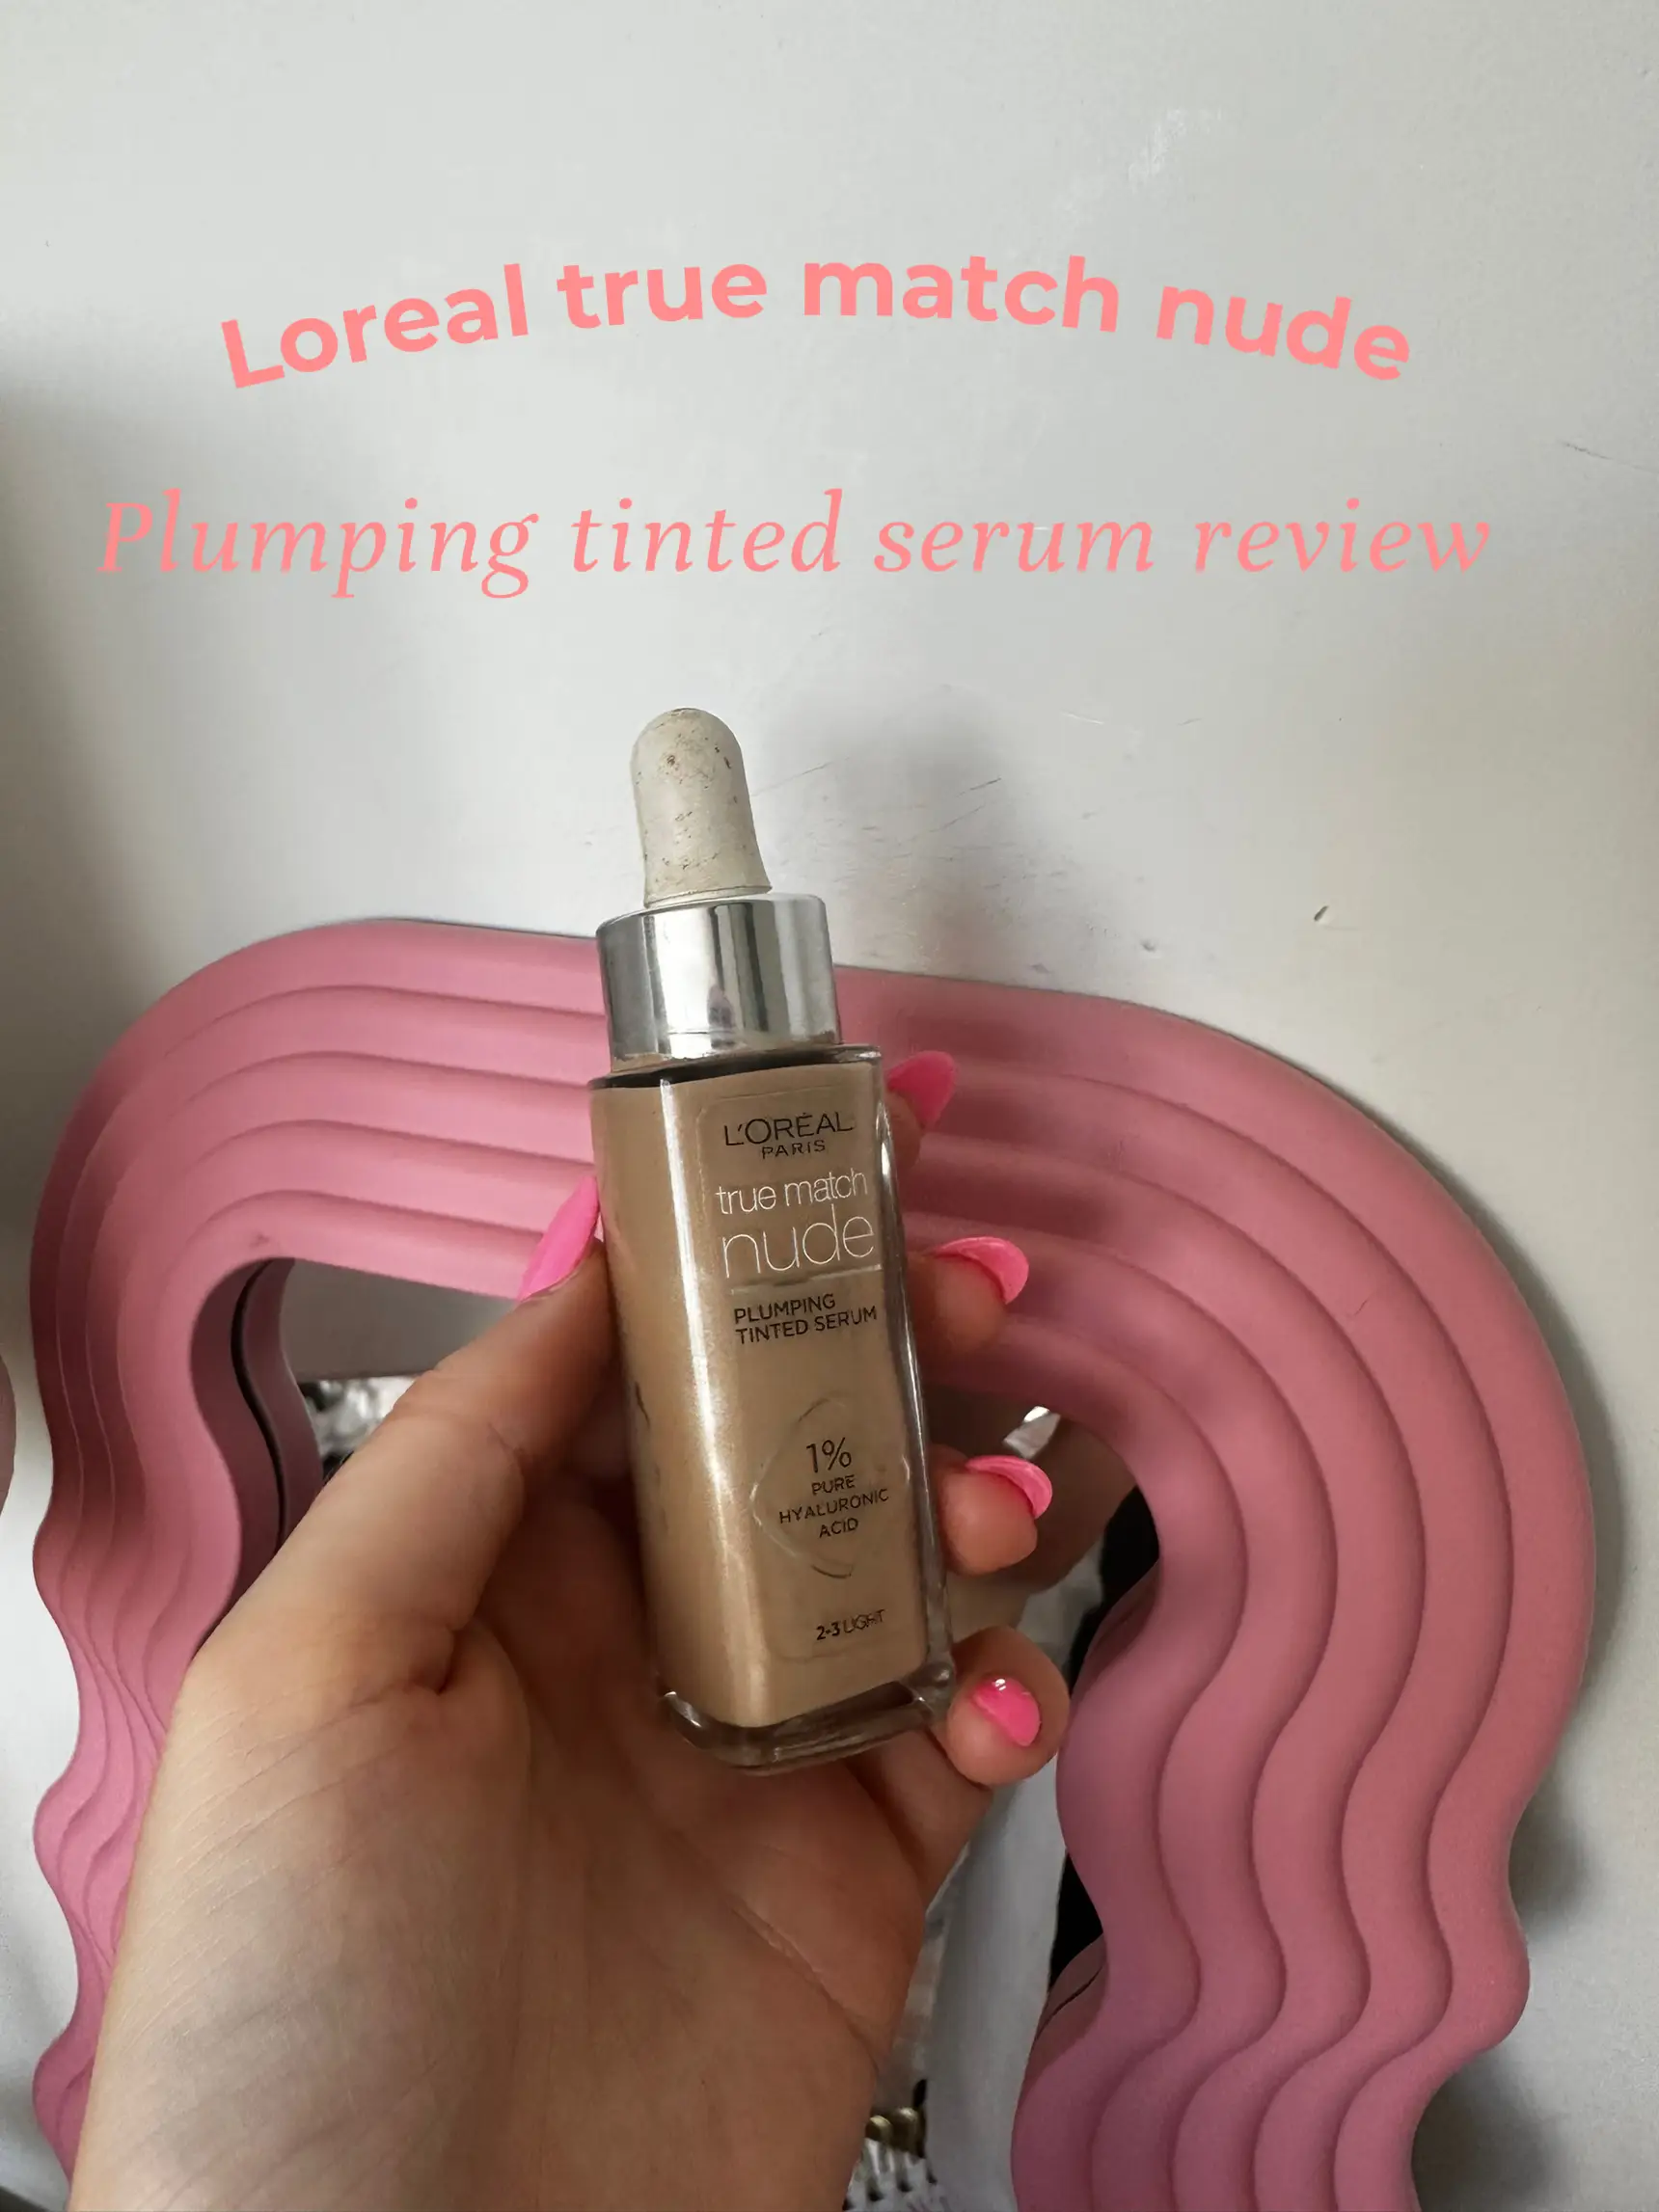 Loreal true match plumping tinted serum review ✨🤍